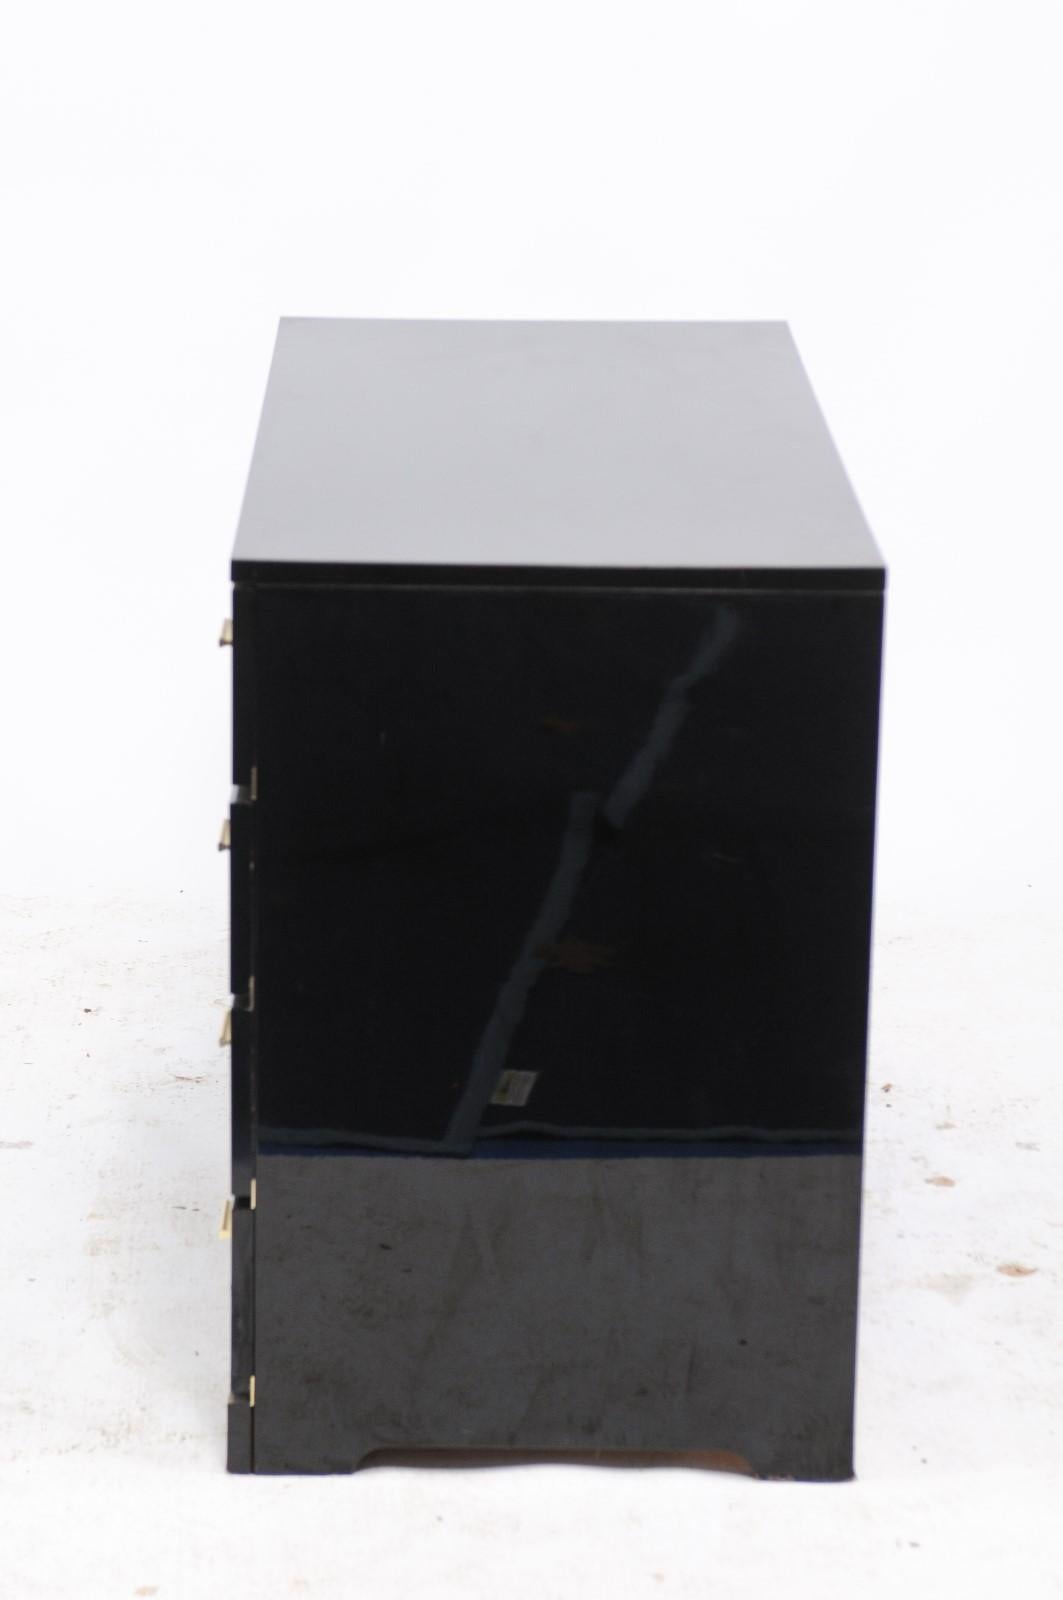 A French Roche Bobois black lacquer dresser from the mid-20th century, with four drawers and brass hardware. We found this vintage 1960s Roche Bobois black lacquered dresser in Paris and fell in love with the sleek lines and the subtle brass